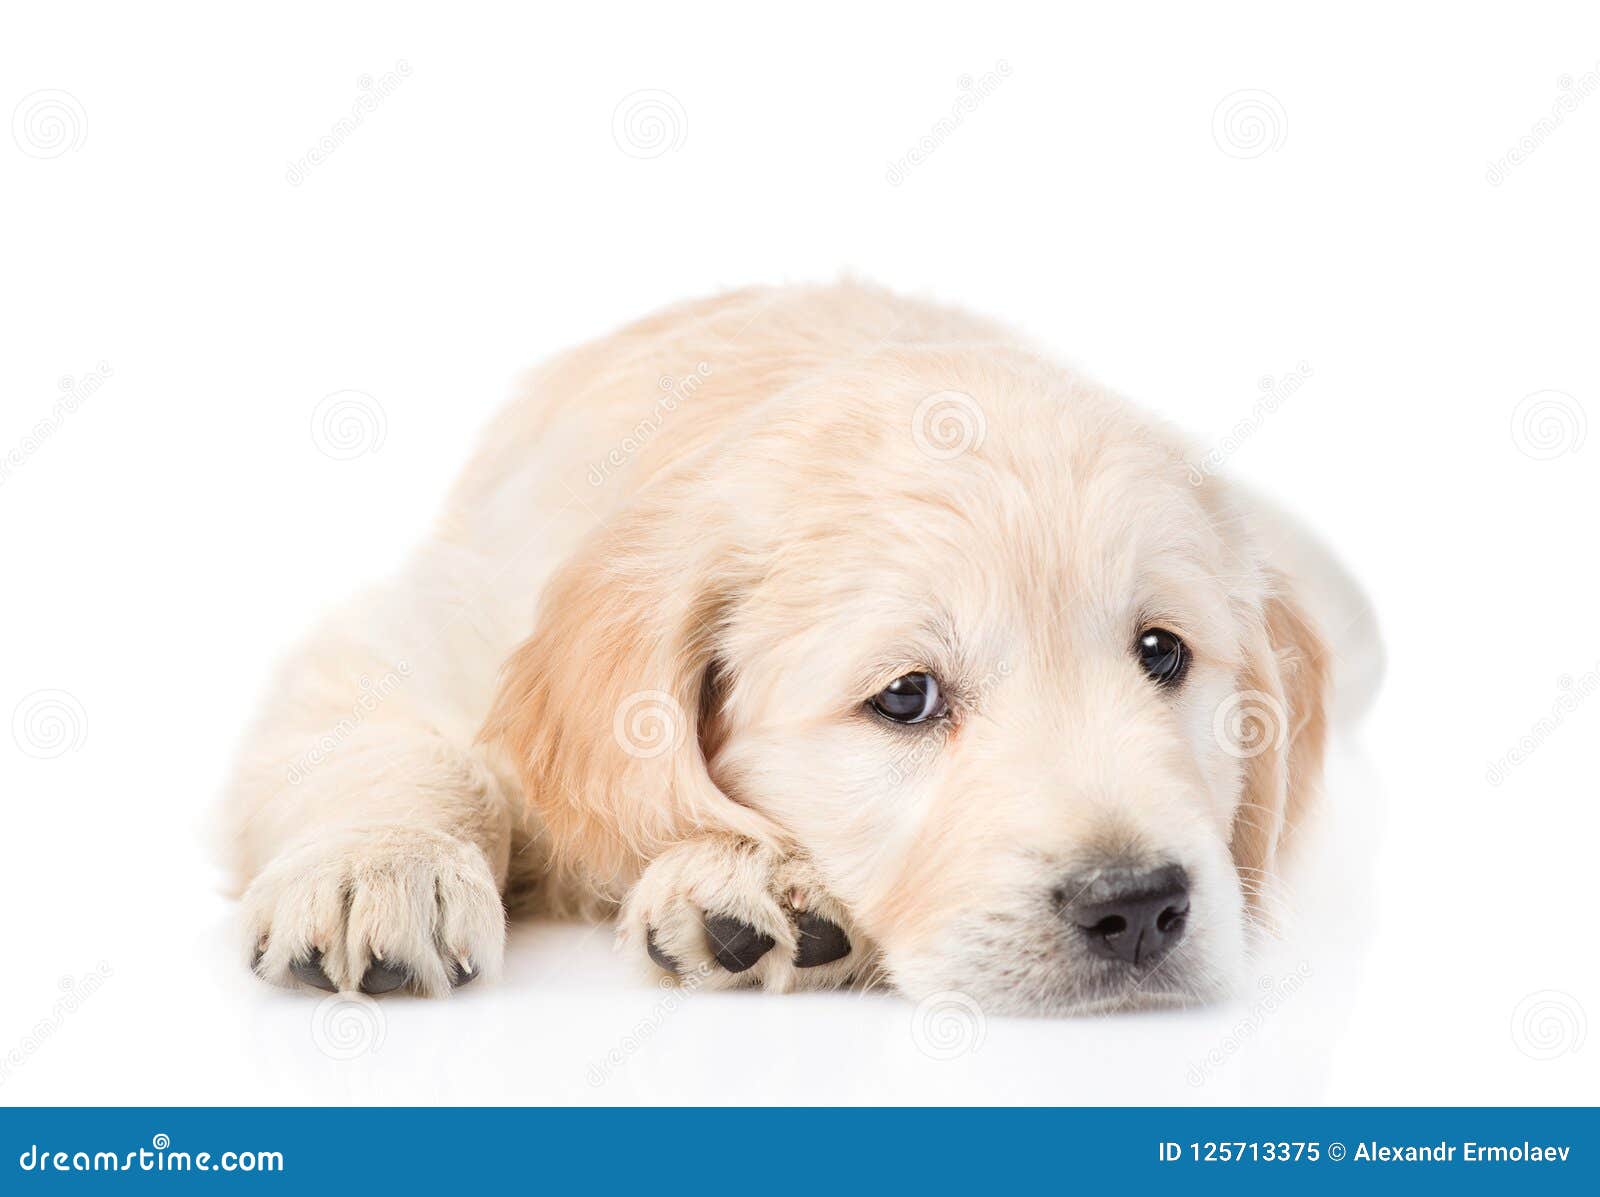 Sad Golden Retriever Puppy Lying In Front View. Isolated On White Stock Image - Image of ...